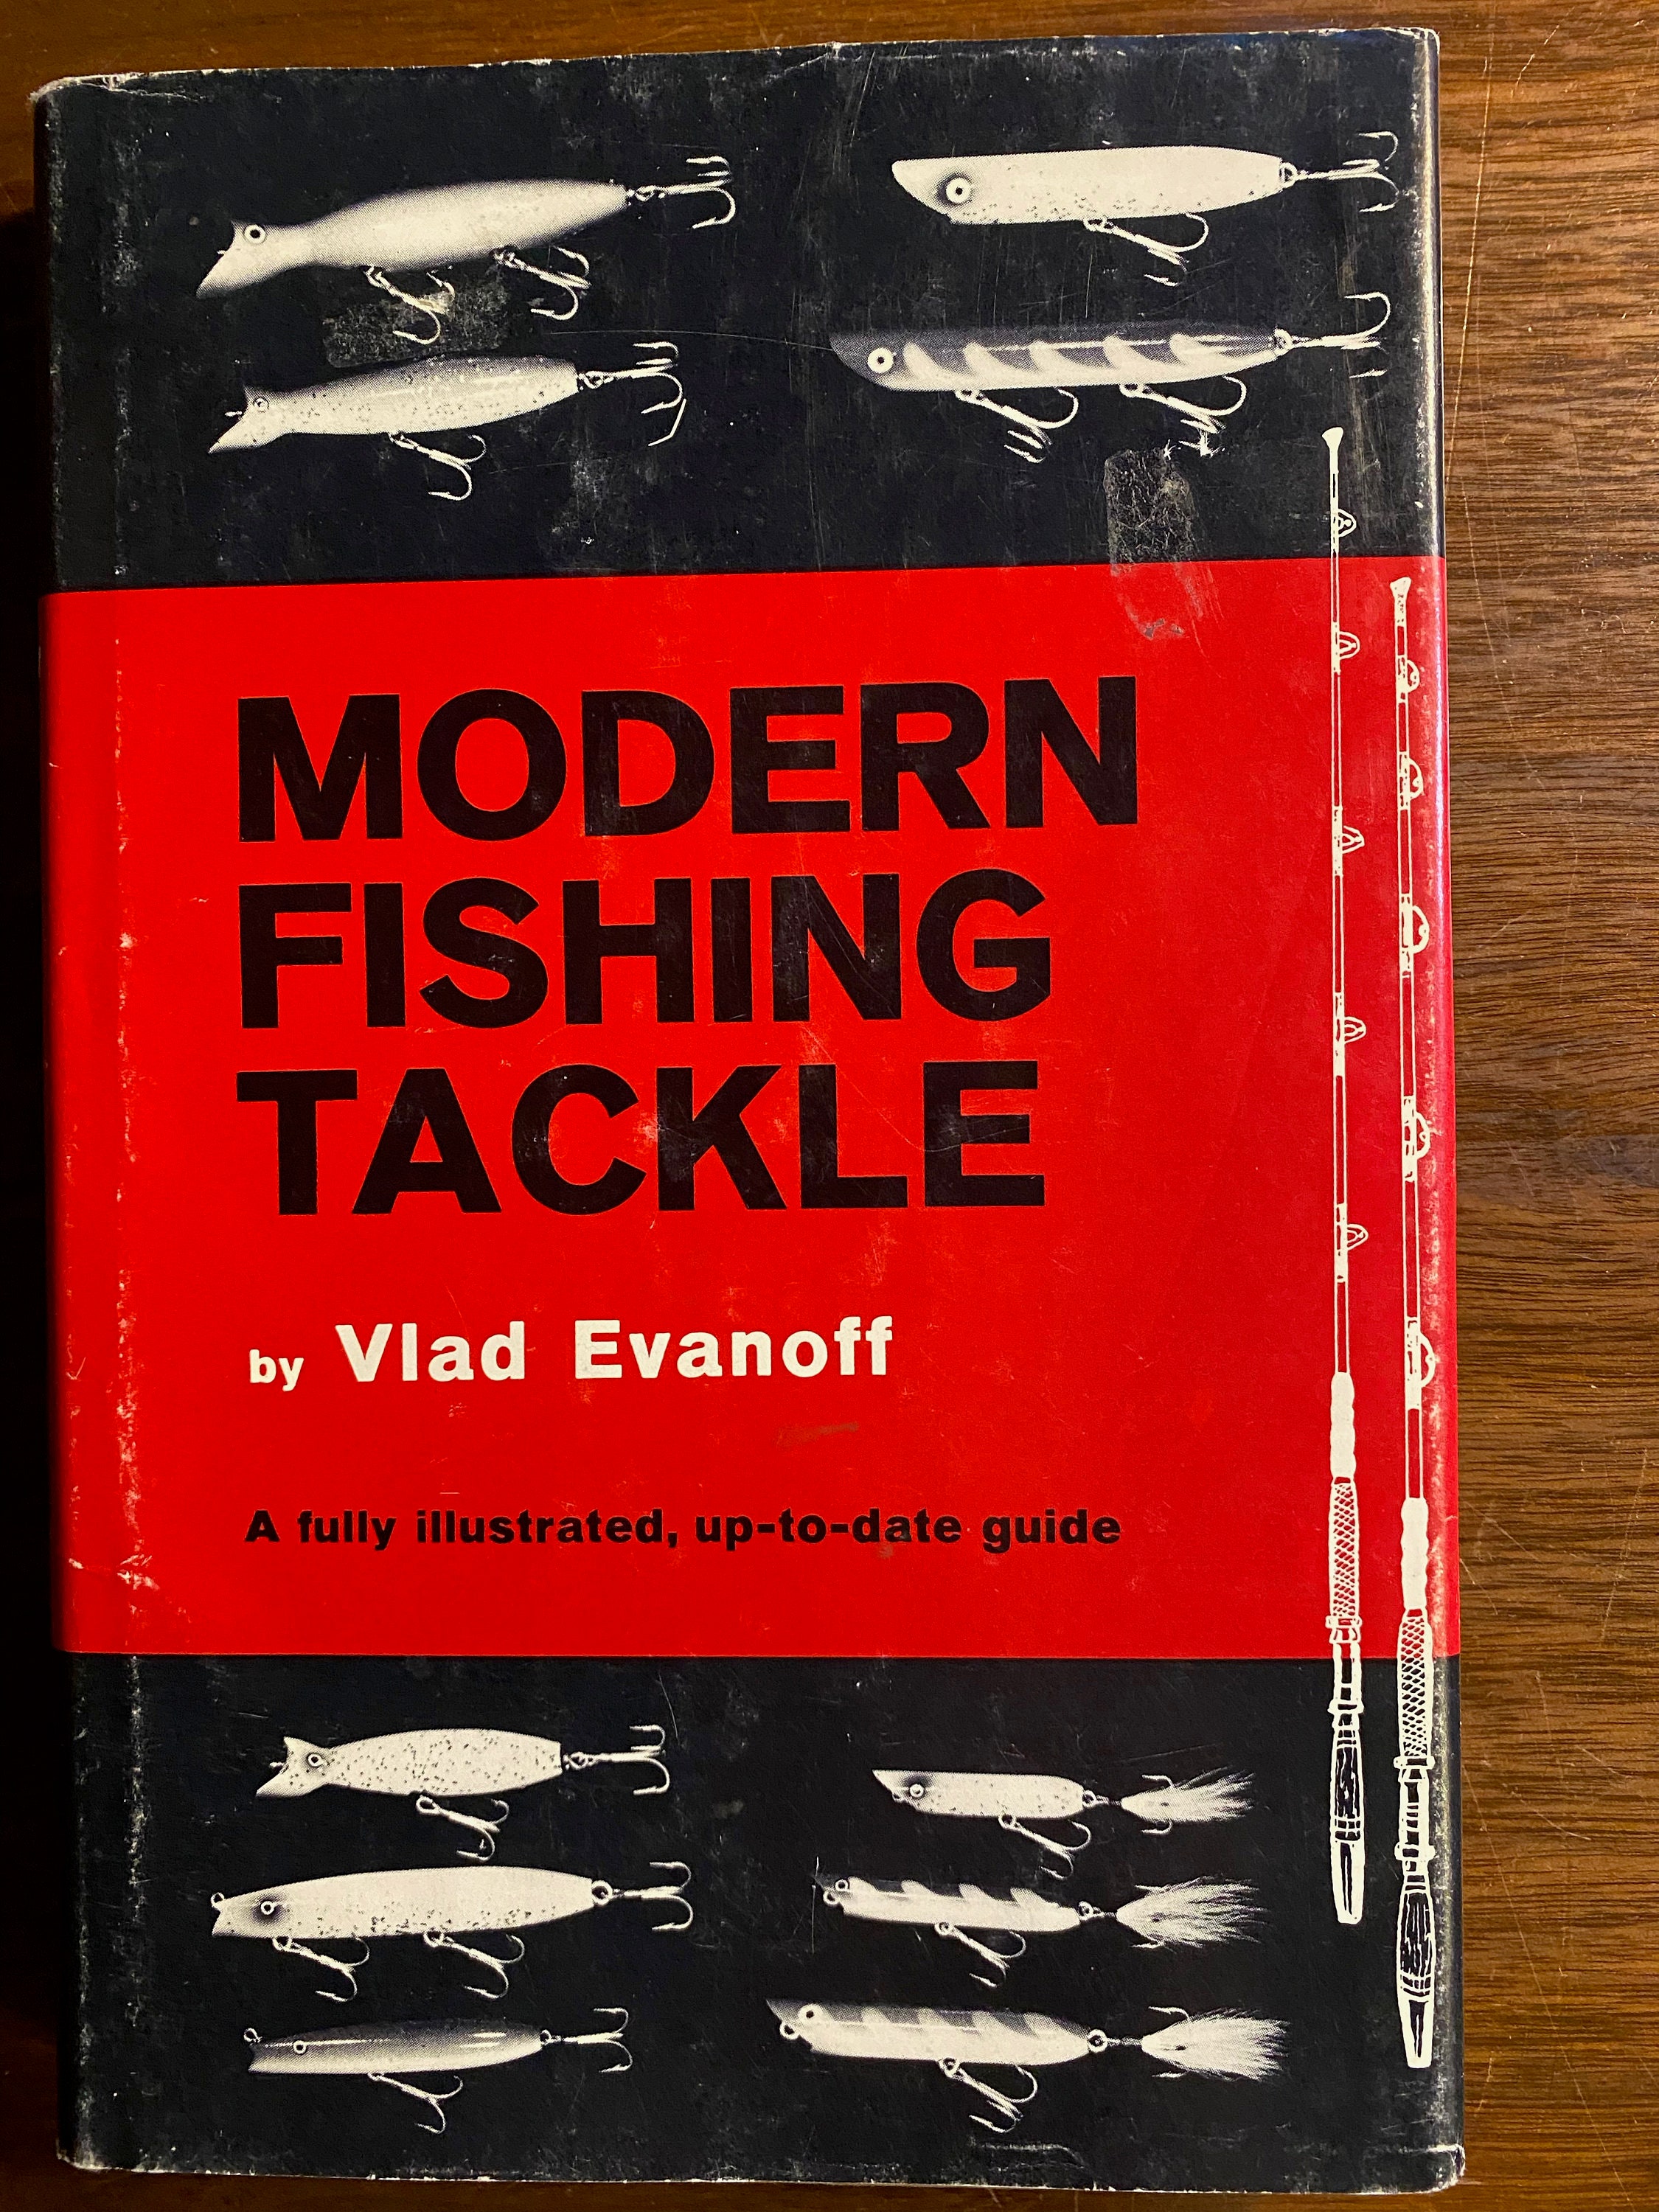 Modern Fishing Tackle Vlad Evanoff 1961 Guide Informational How to